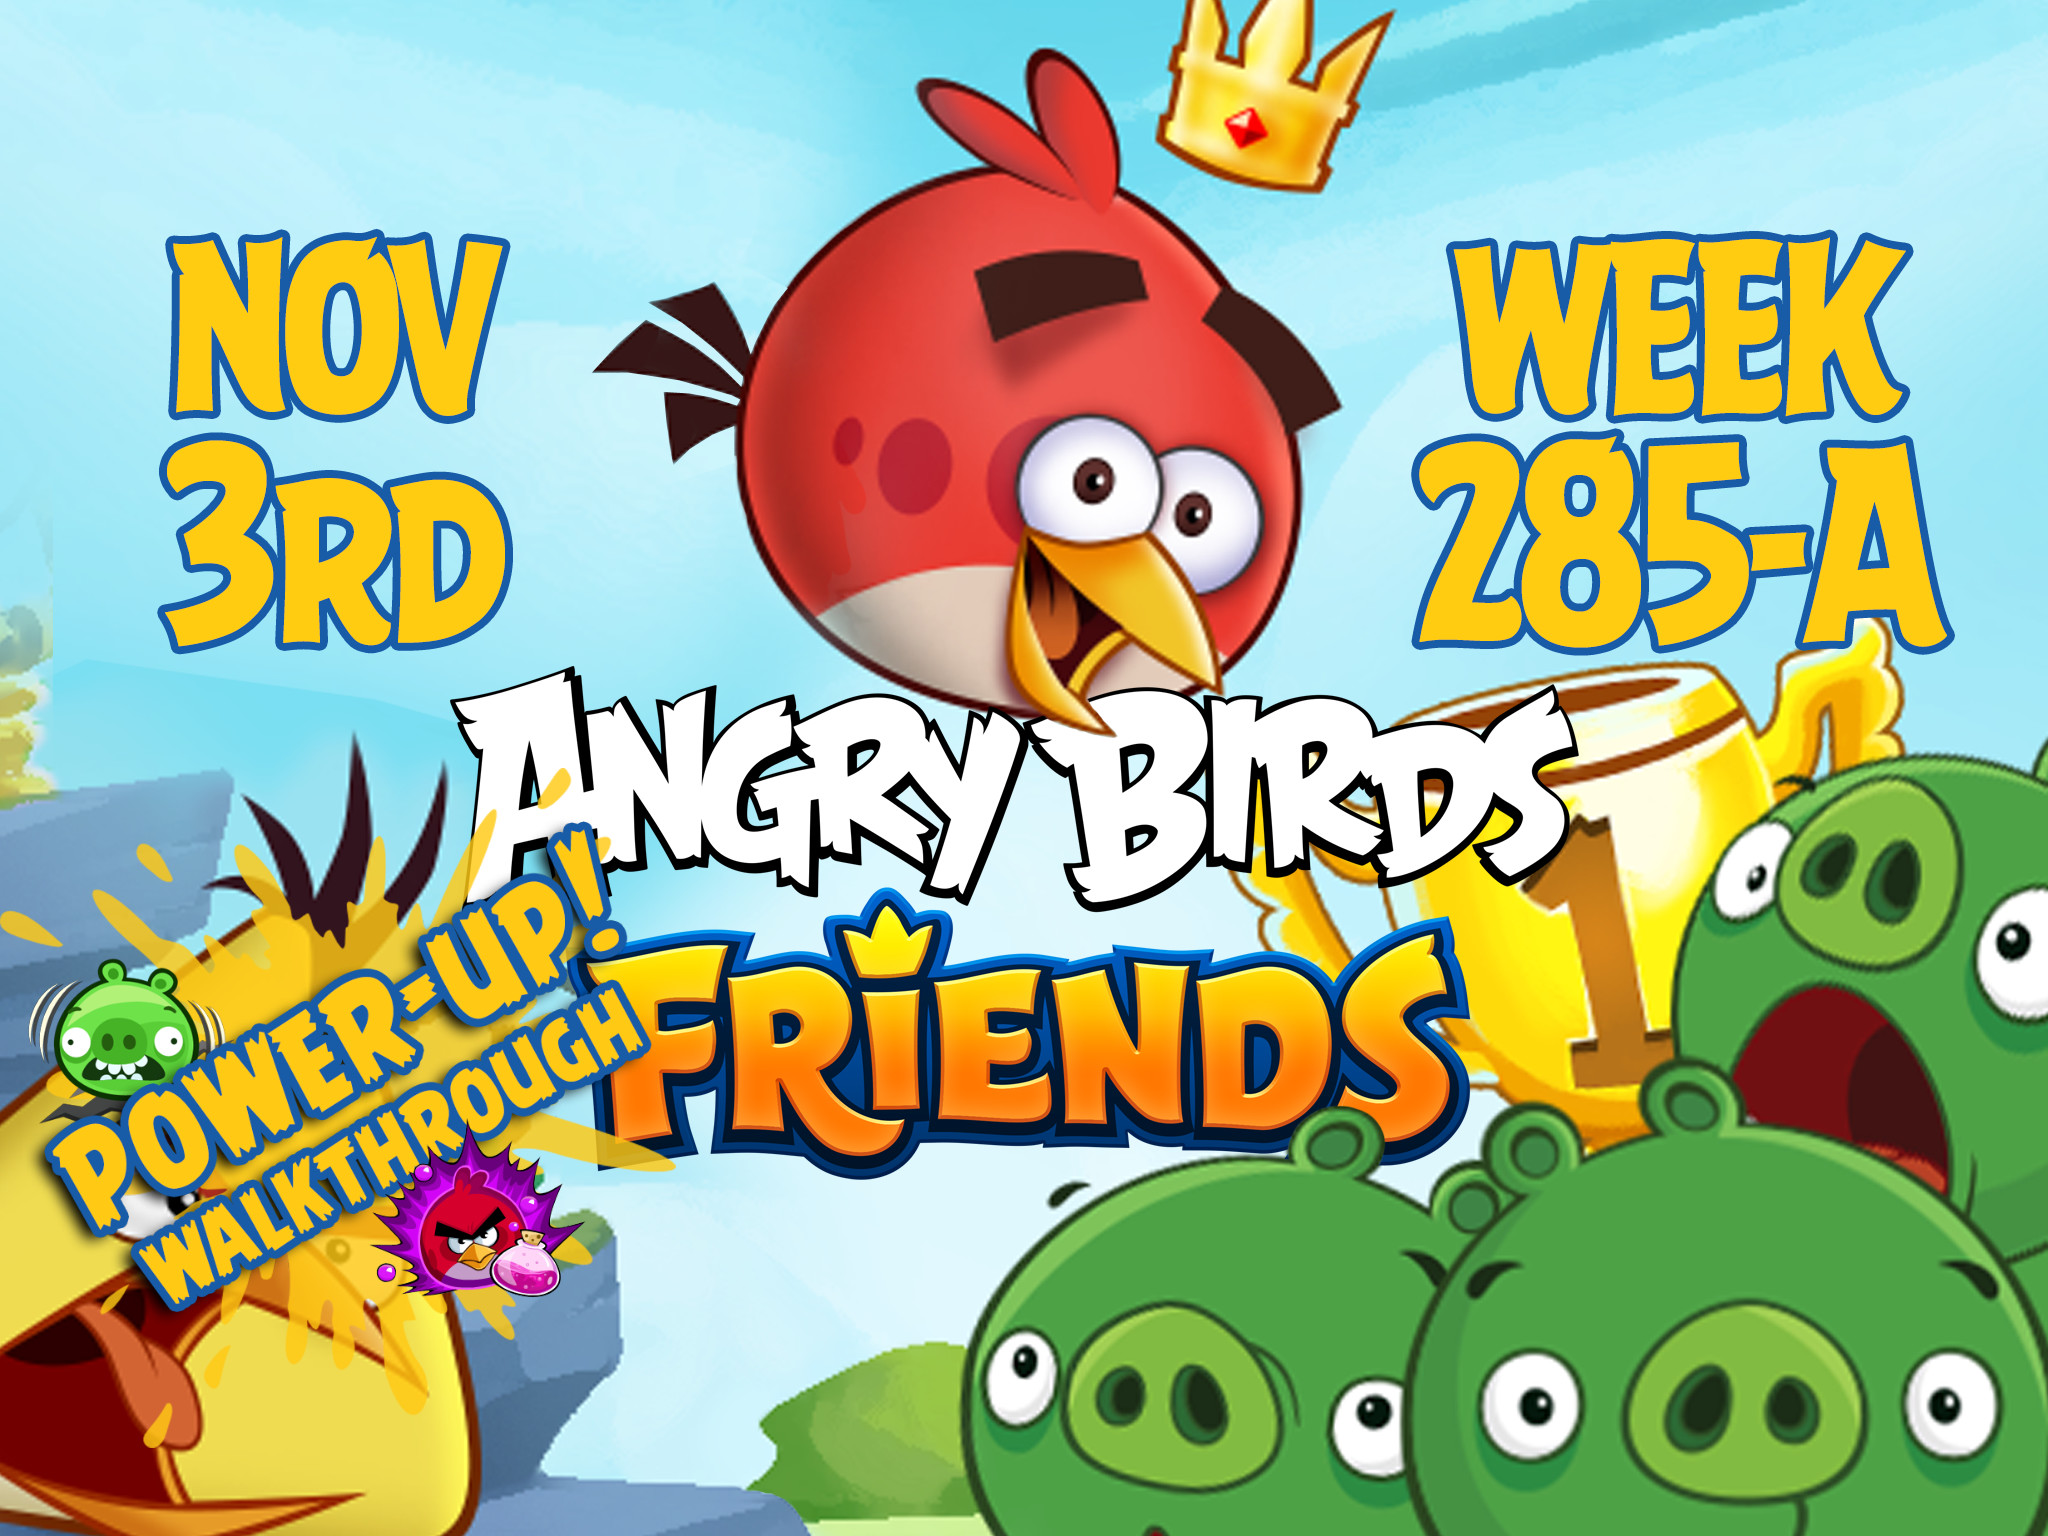 Angry Birds Friends Tournament Week 285-A Feature Image PU